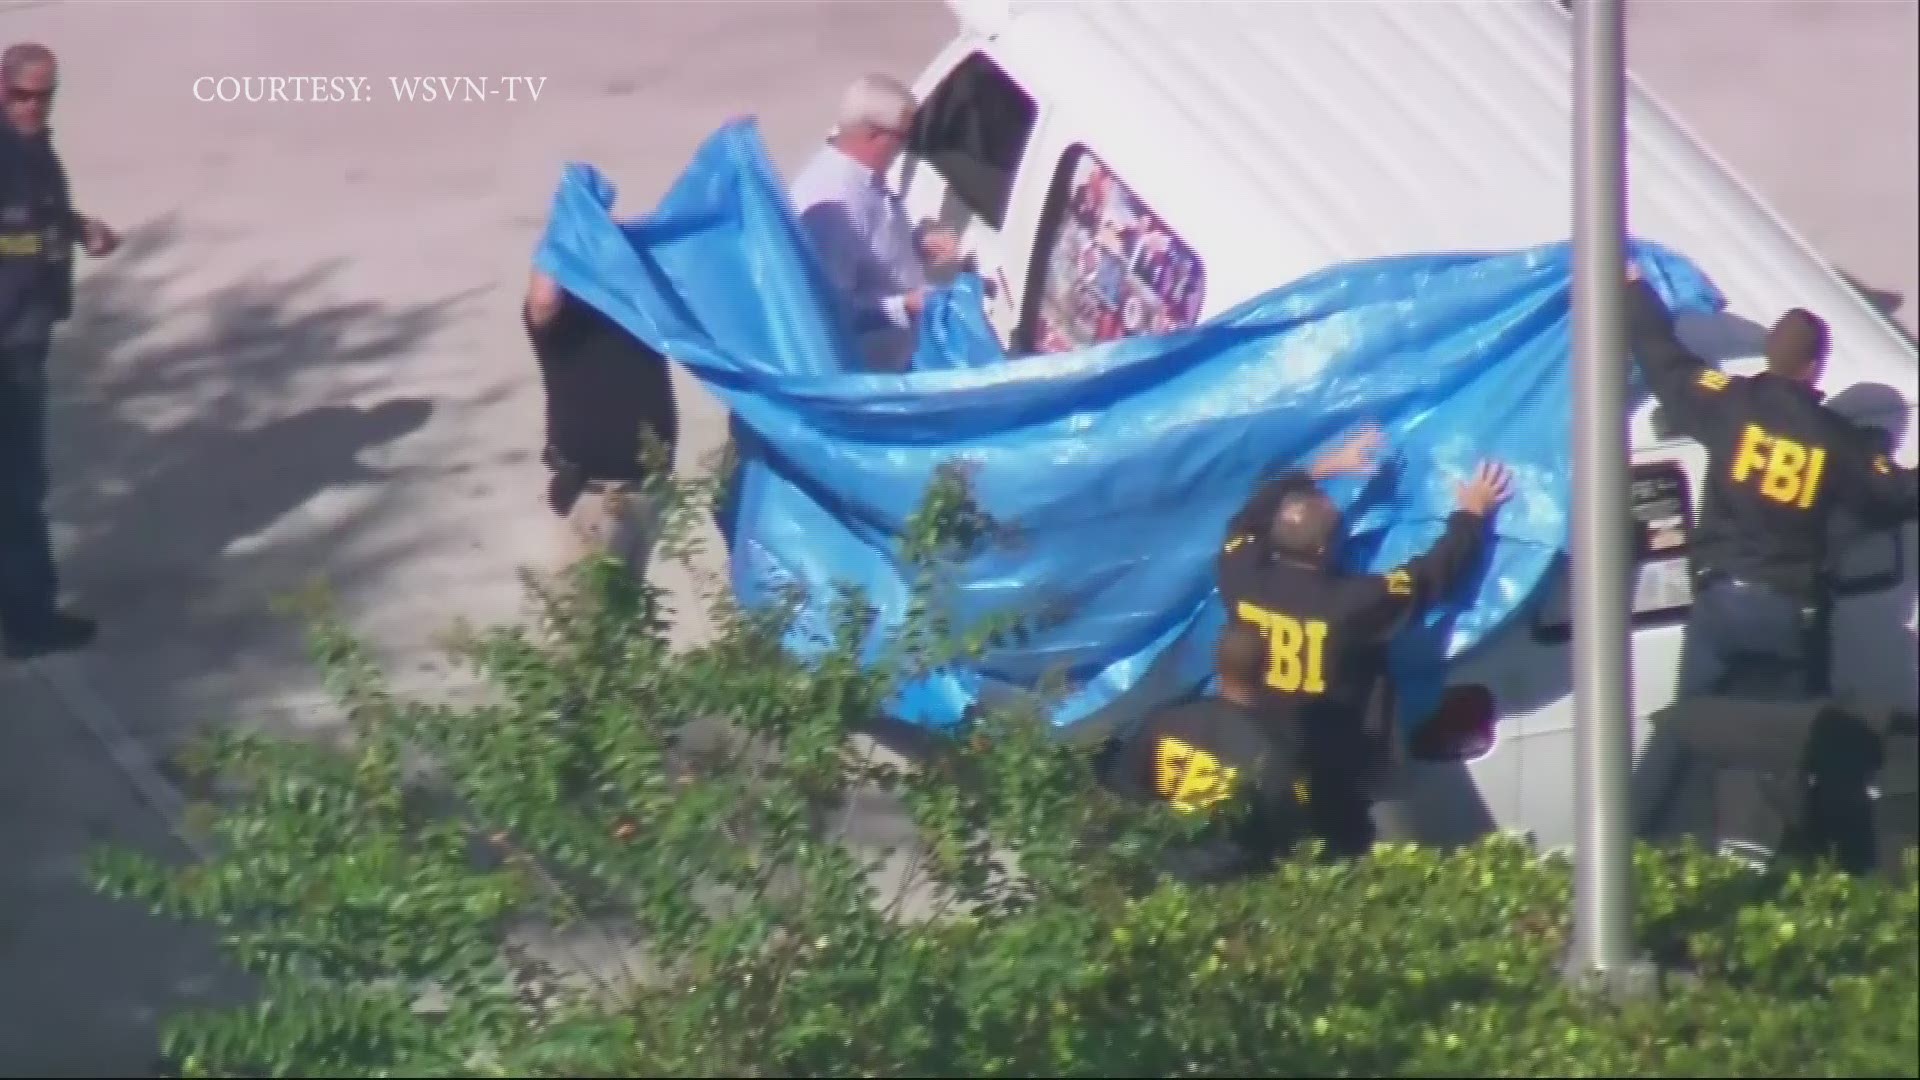 Police were seen covering a van with a blue tarp not long after two law enforcement officials say a person was taken into custody in Florida in connection with package bombs that were sent to high-profile critics of the president. (Courtesy WSVN via AP)